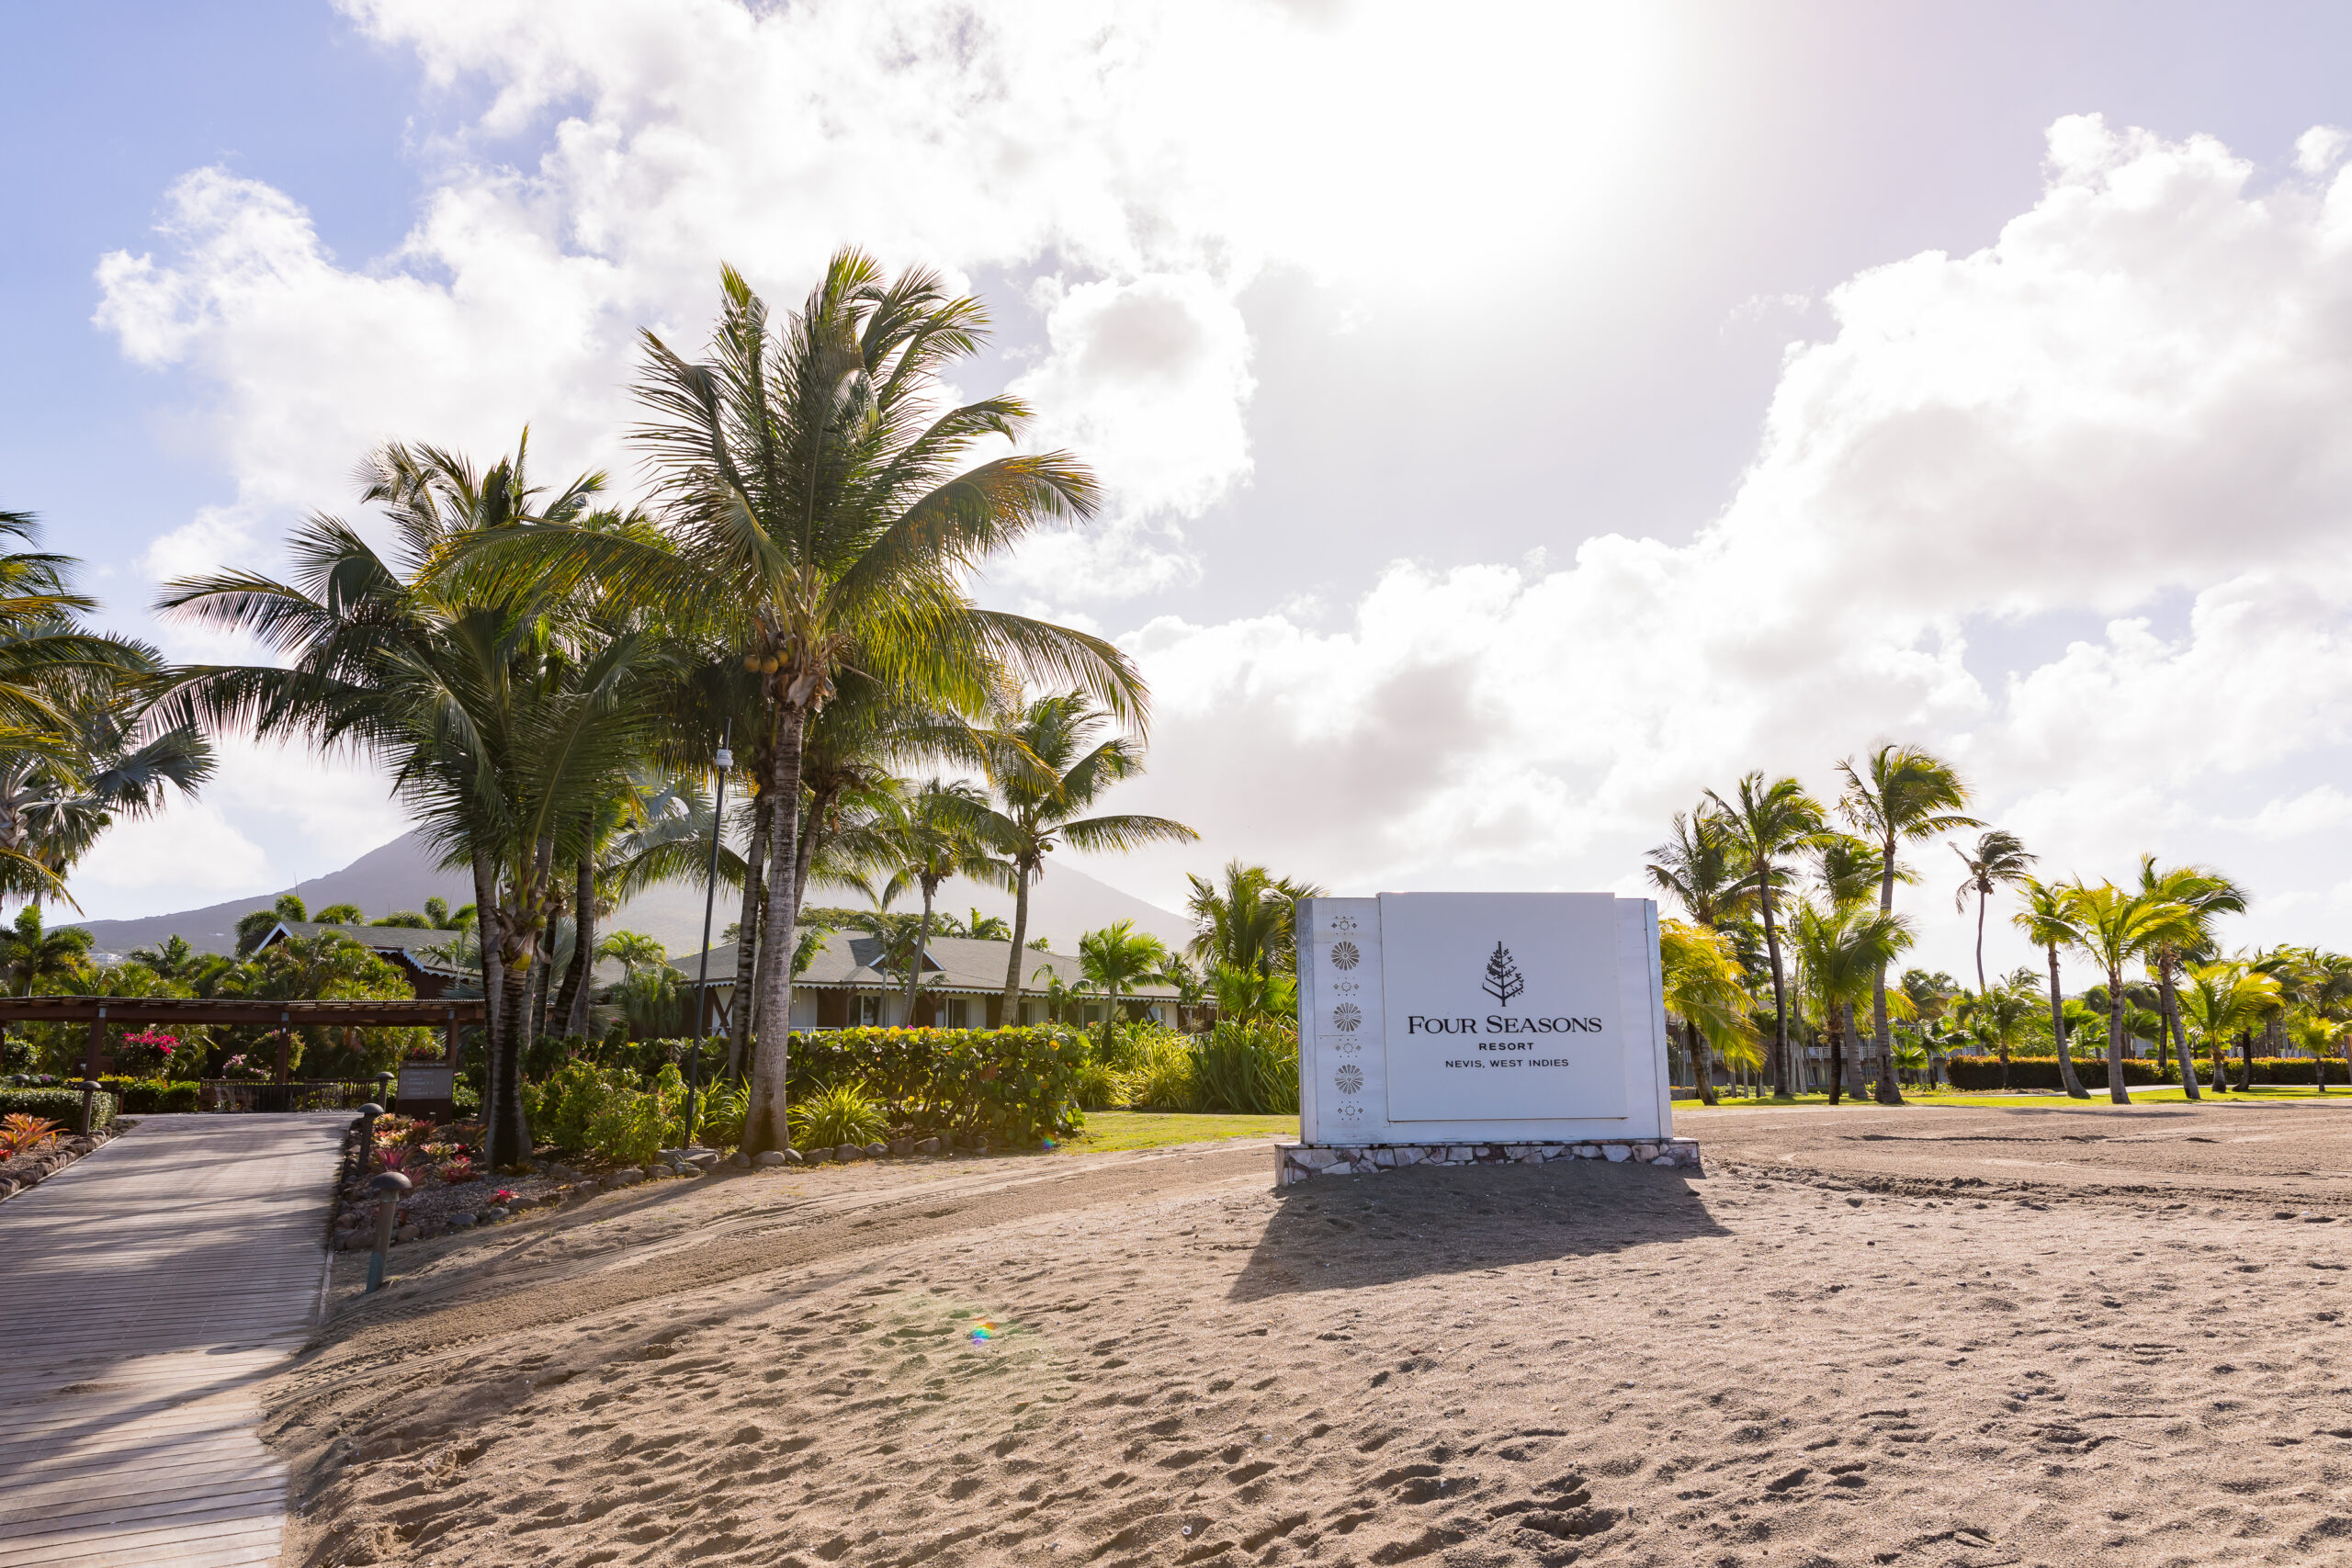 It’s time to book a trip to the Four Seasons Nevis